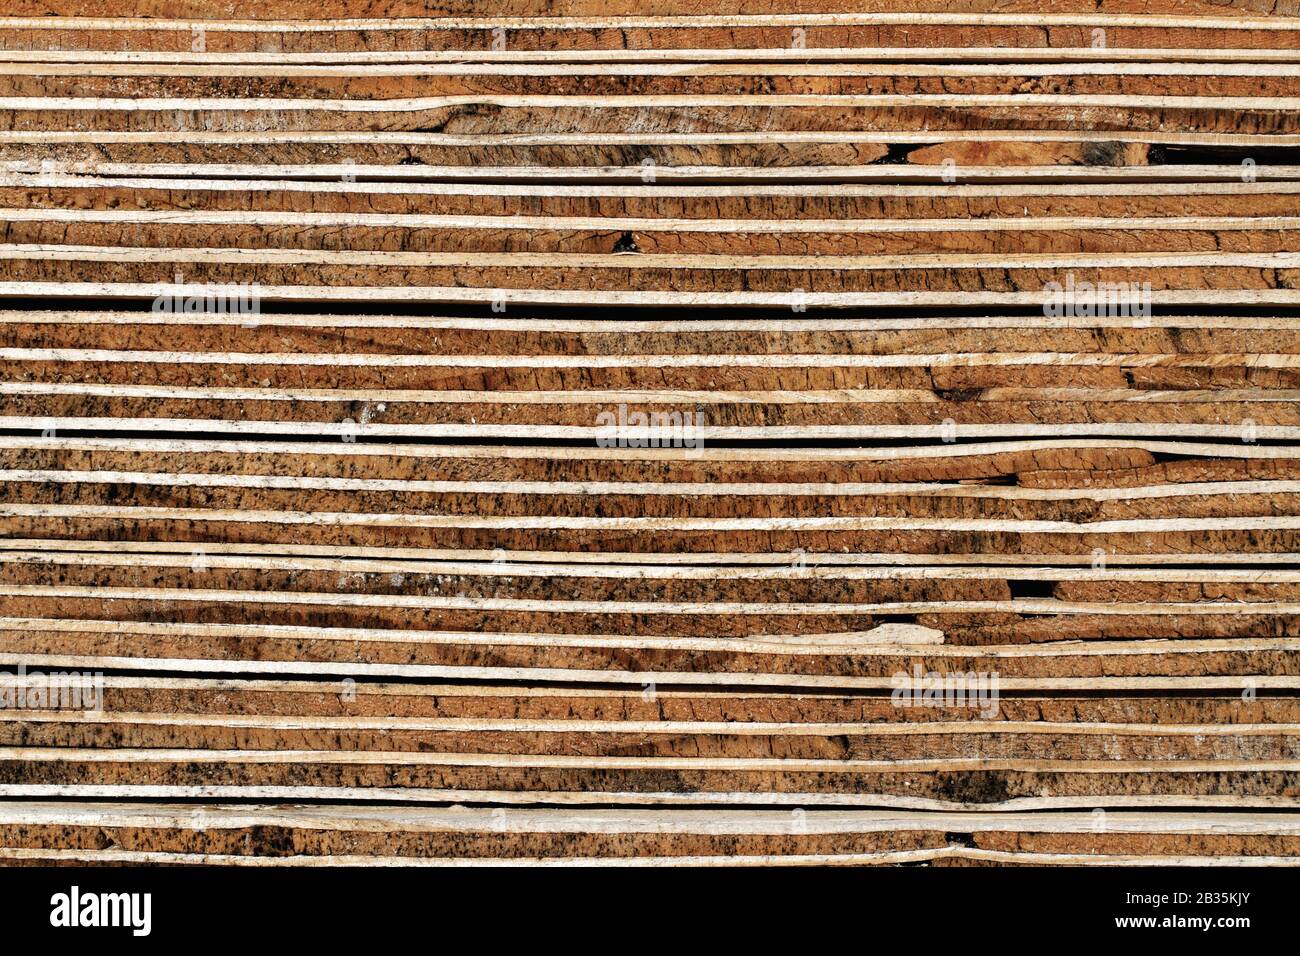 Plywood Background: Weathered Cross Section of Piled Plywood Panels - Detail:timber background showing the detailed view of piled plywood boards Stock Photo